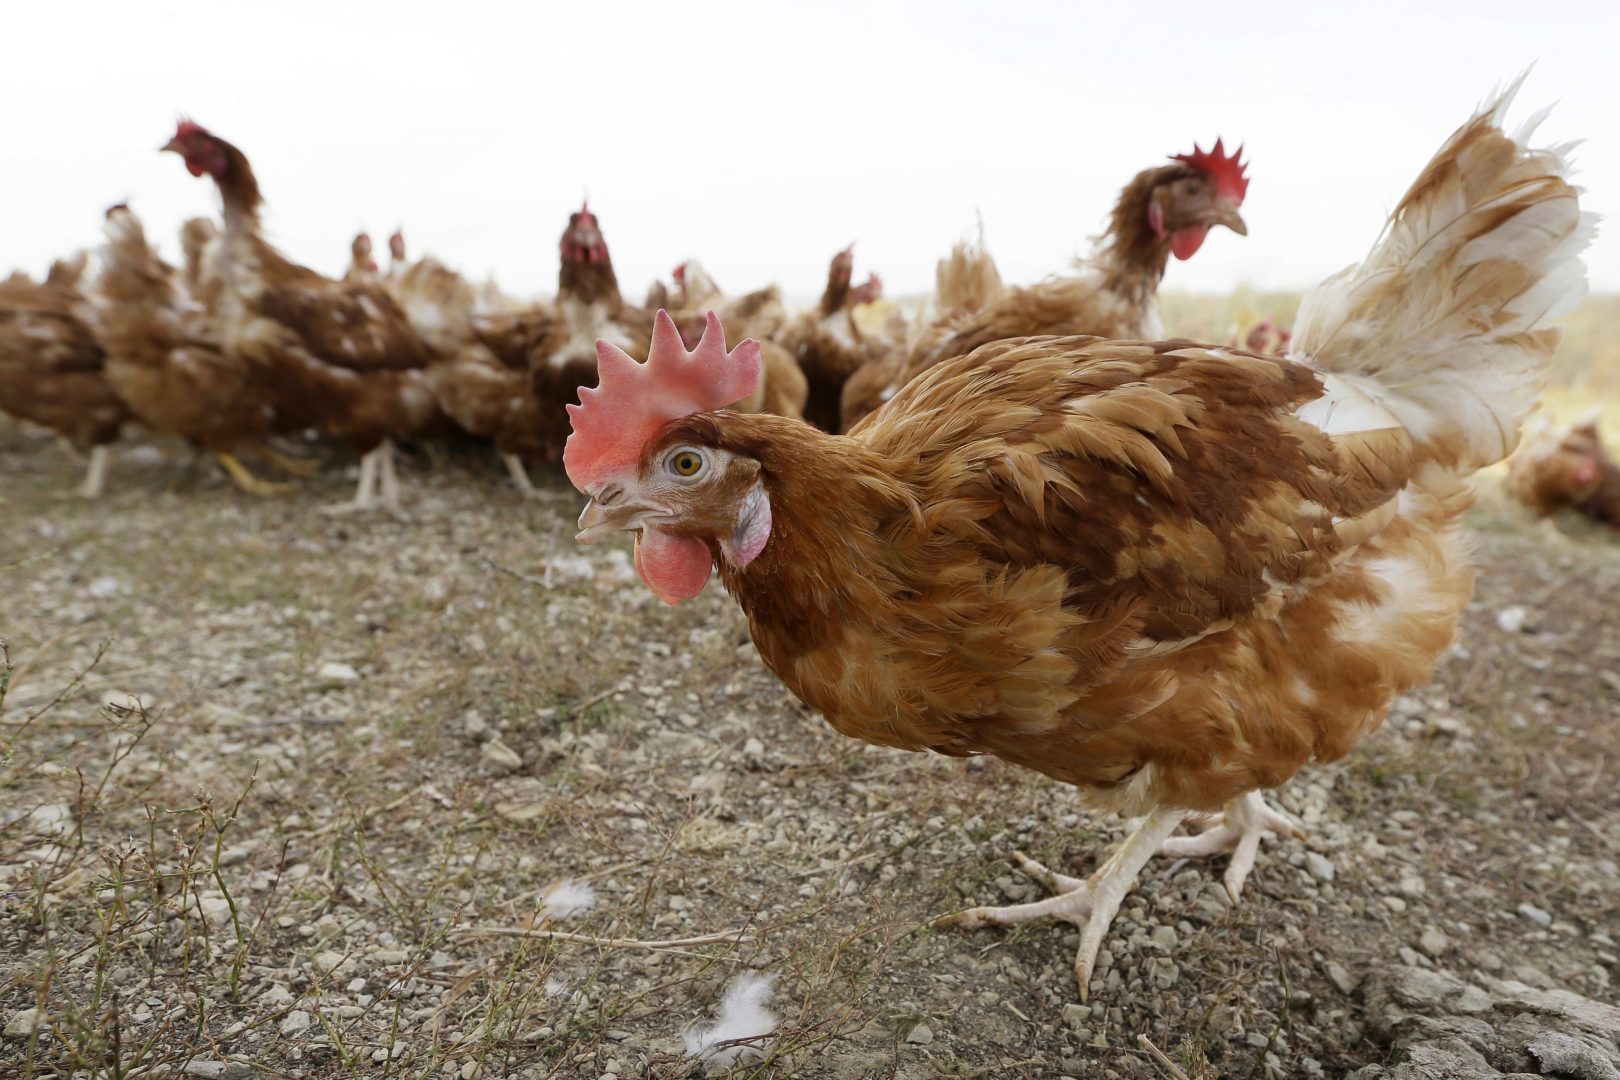  In this Oct. 21, 2015, file photo, cage-free chickens walk in a fenced pasture at an organic farm near Waukon, Iowa.